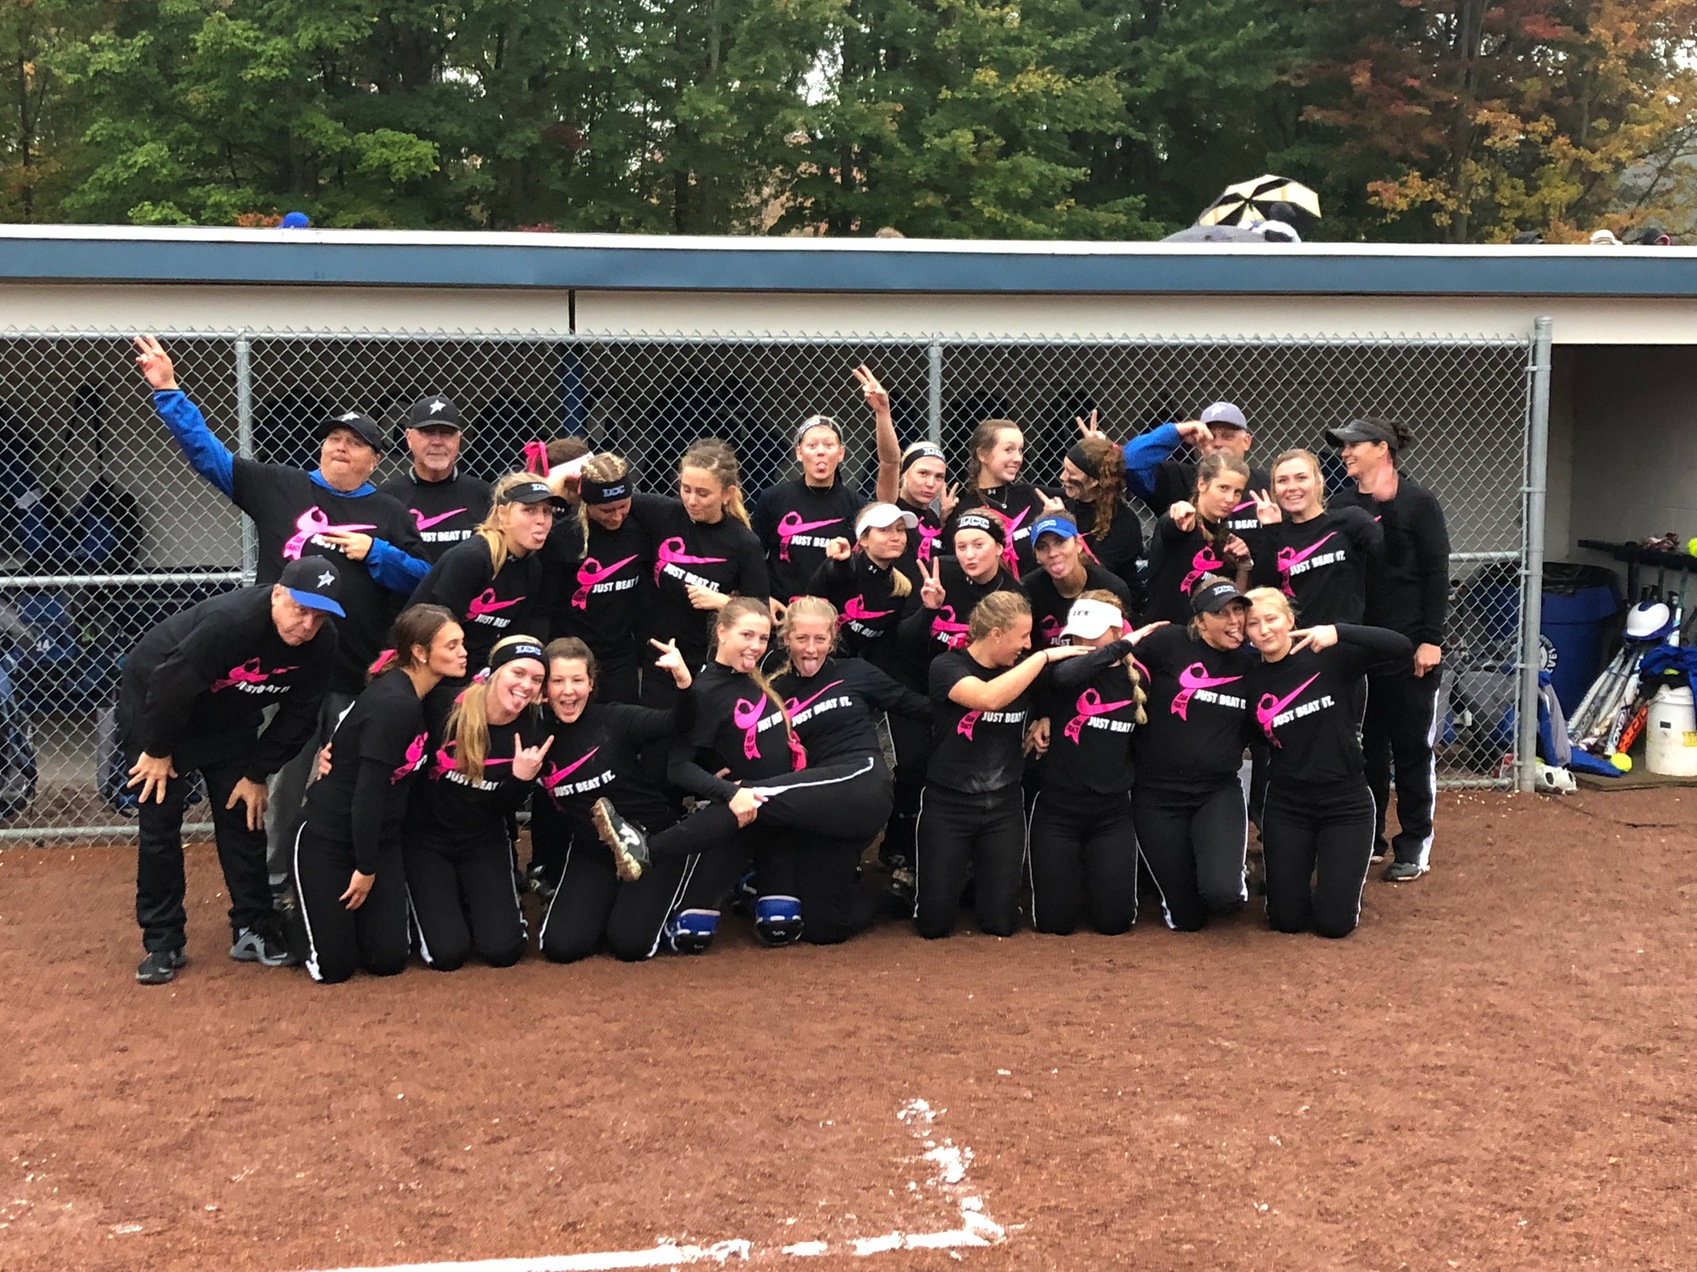 Softball Team supports AD's wife's fight against Breast Cancer